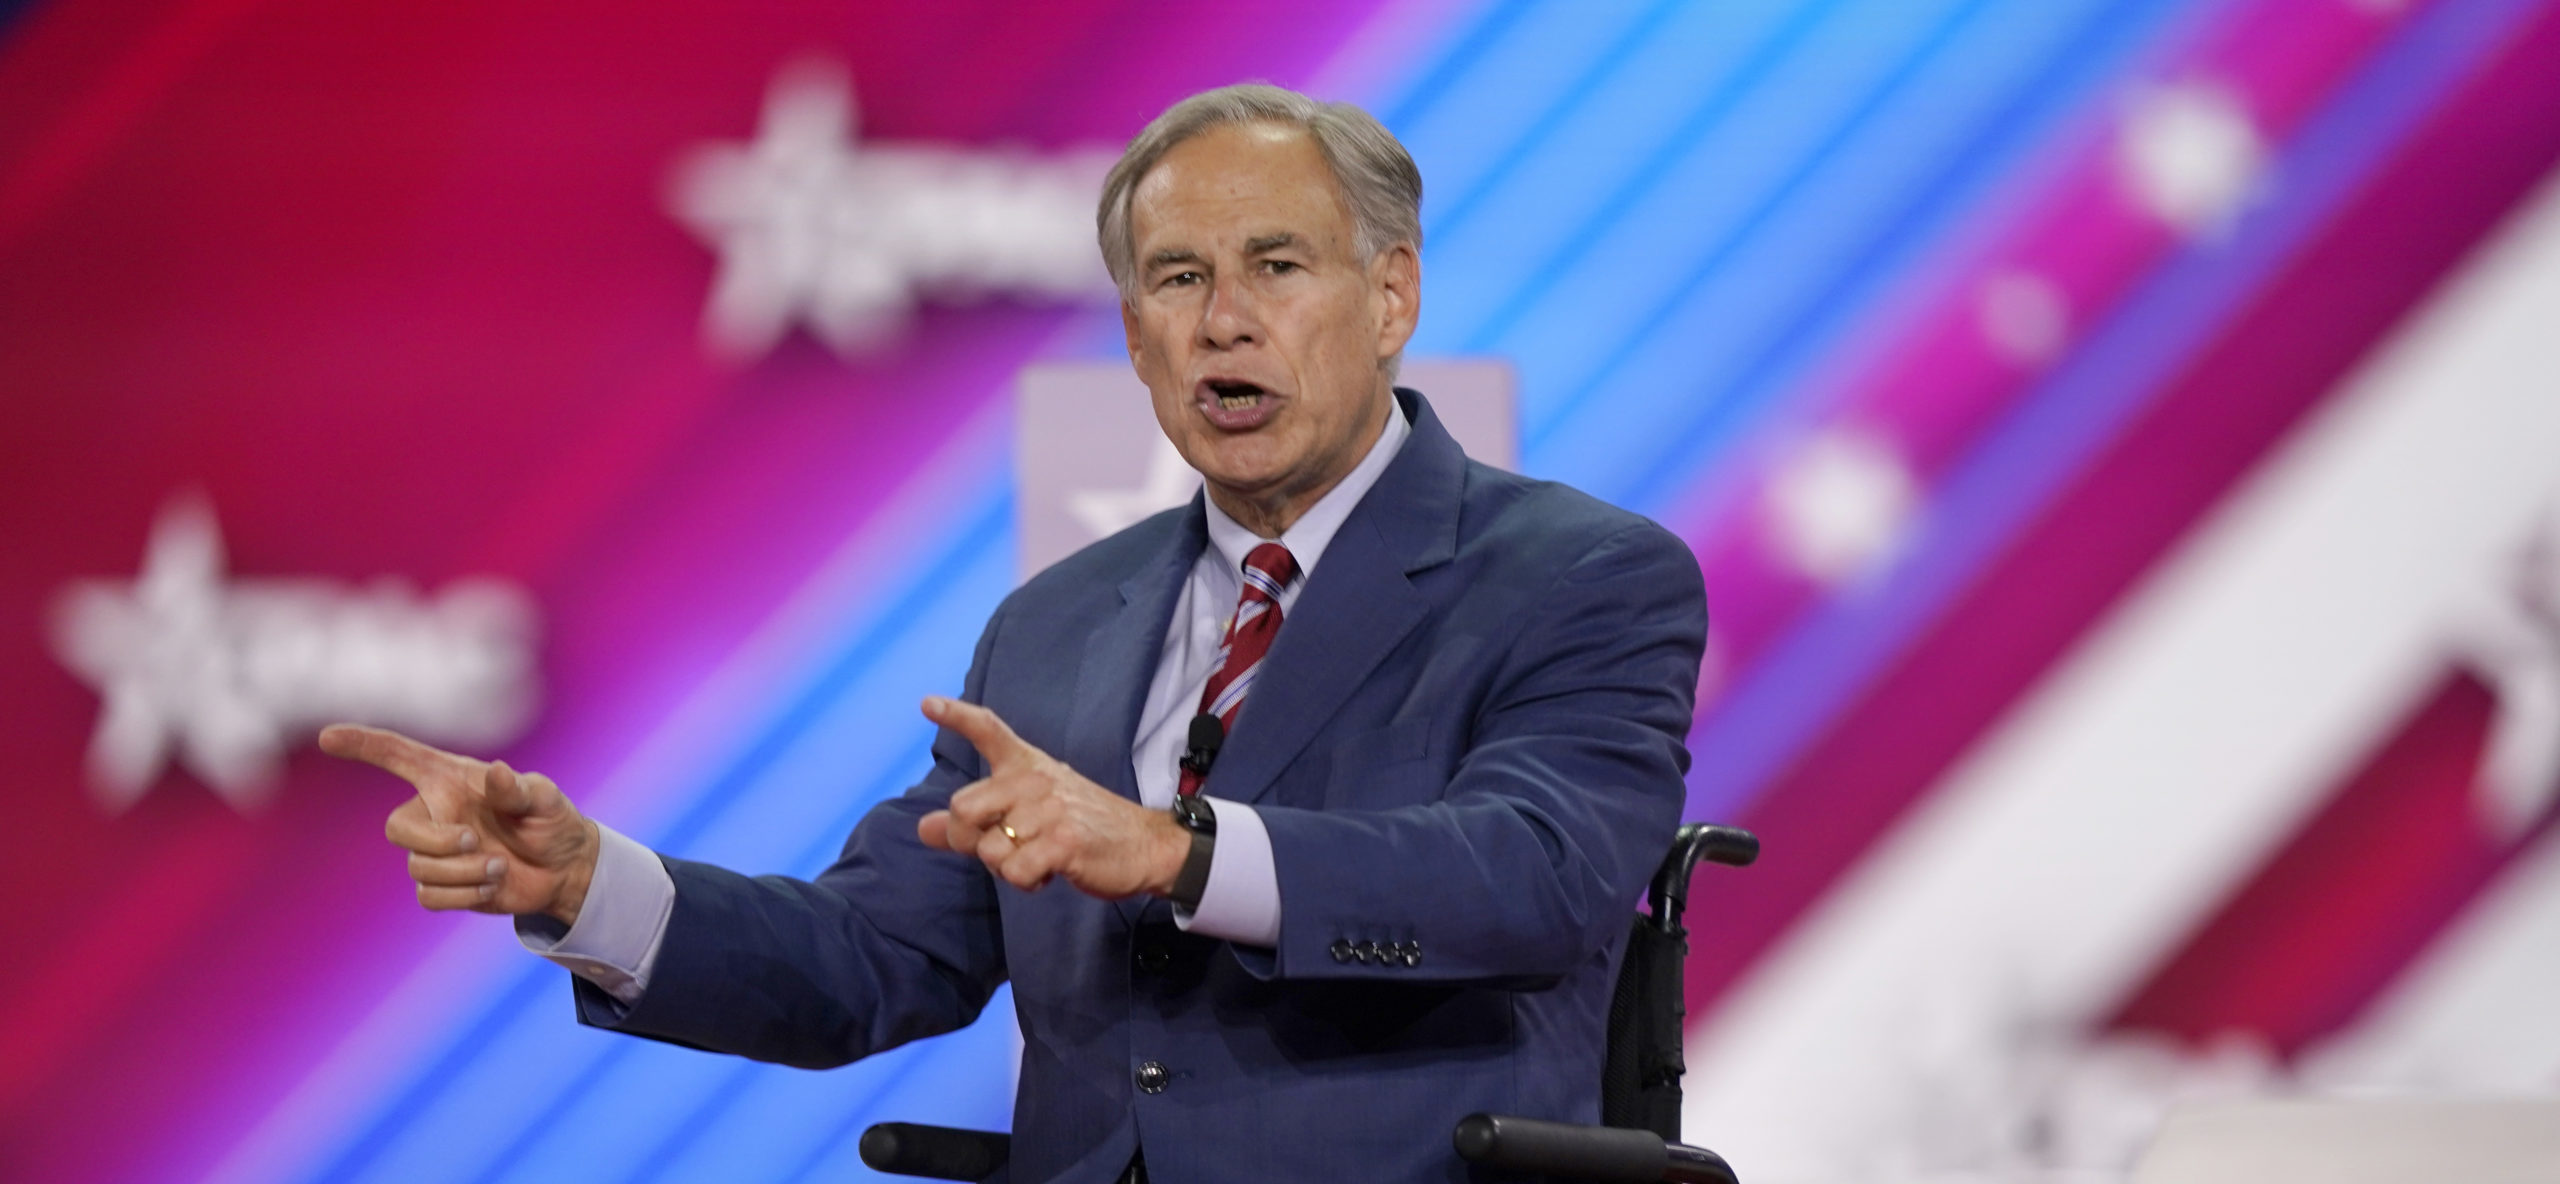 Governor Greg Abbott speaks at the Conservative Political Action Conference in Dallas on August 4, 2022.